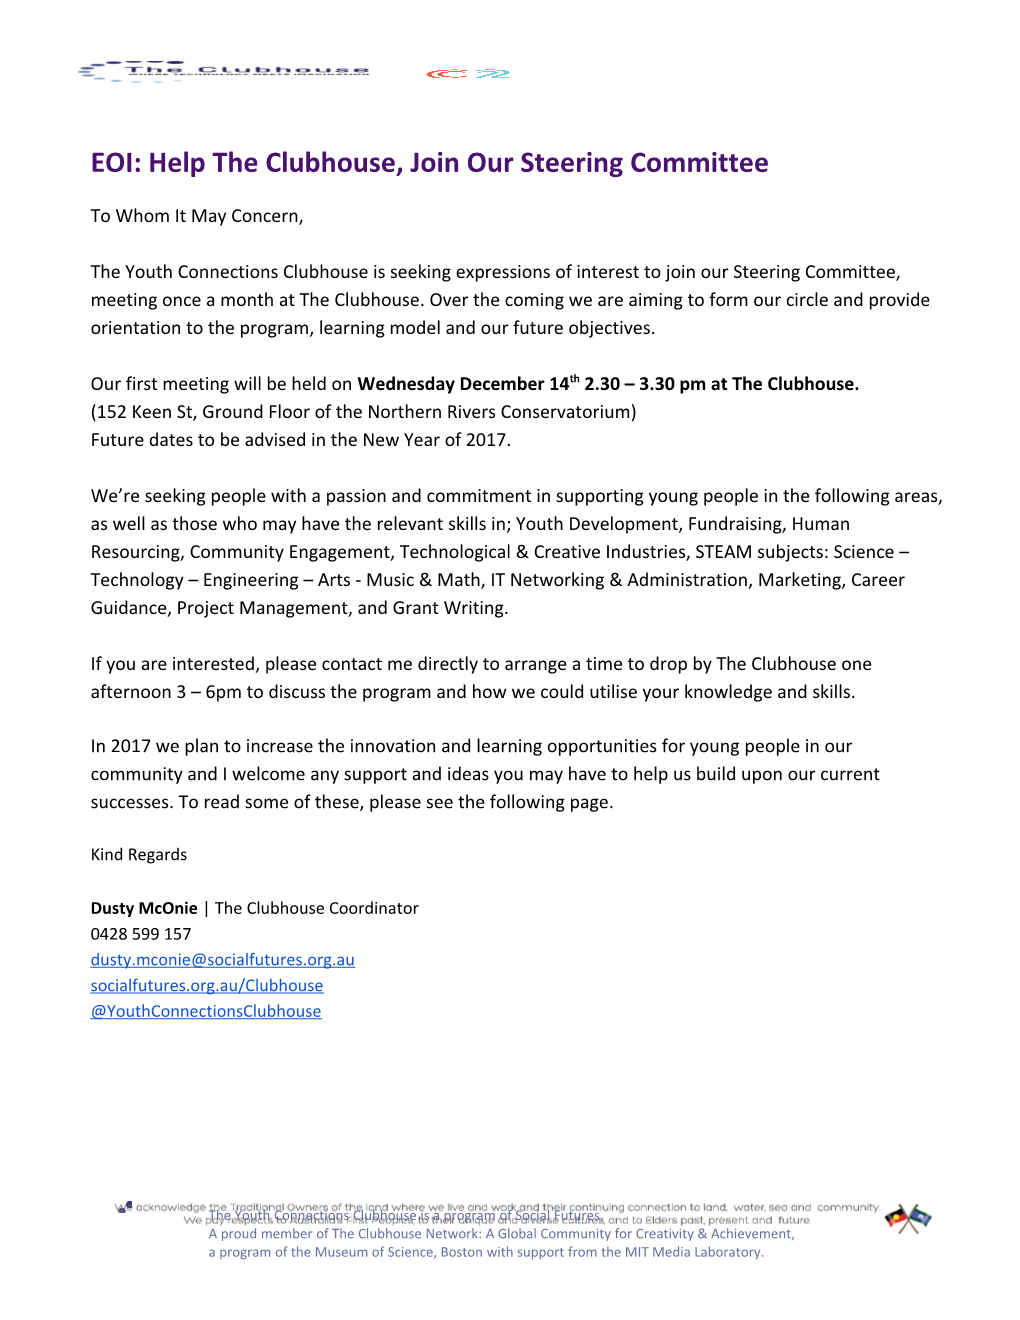 EOI: Help the Clubhouse, Join Our Steering Committee